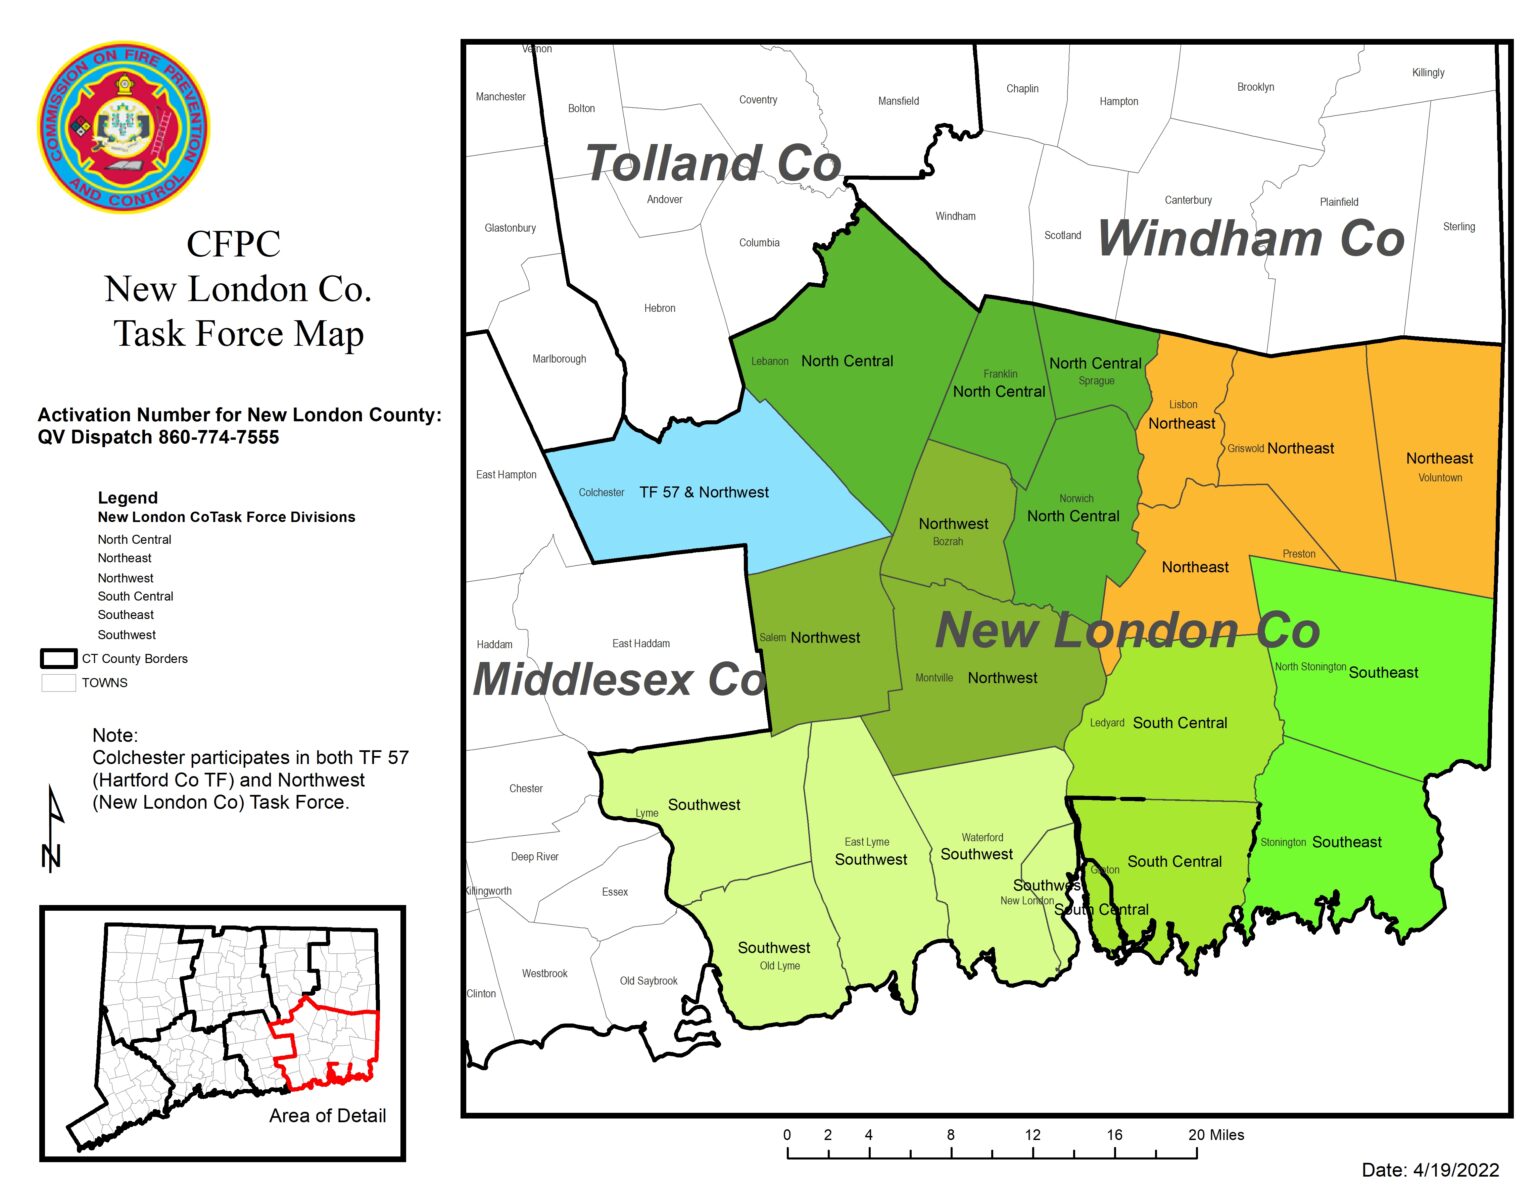 New London County Task Force Map